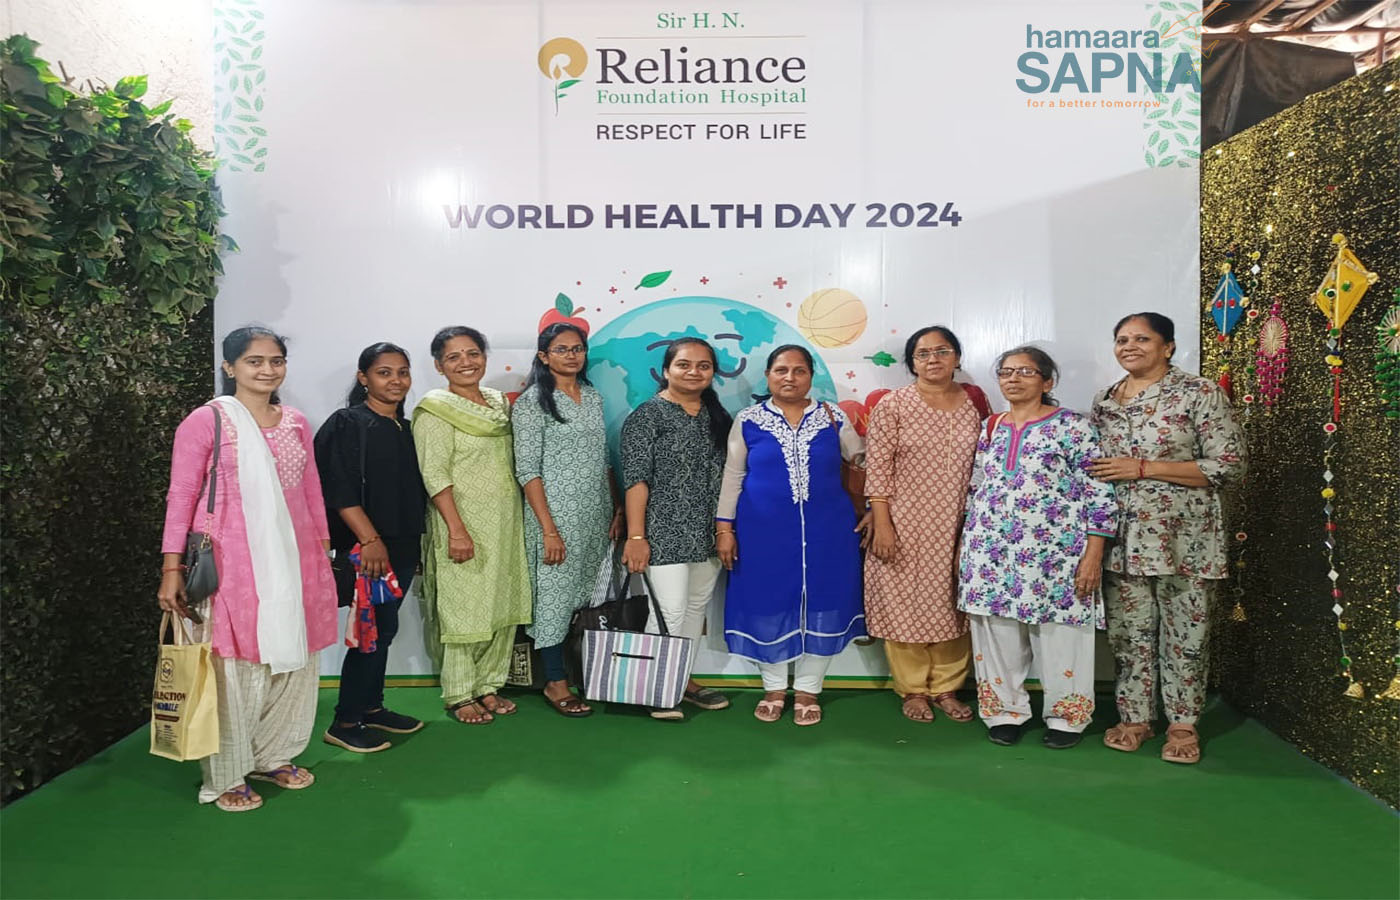 Beneficiaries of Hamaara Sapna's Dahisar Centre avail Comprehensive Healthcare Services at General Health Camp Organized by Reliance Foundation on World Health Day  